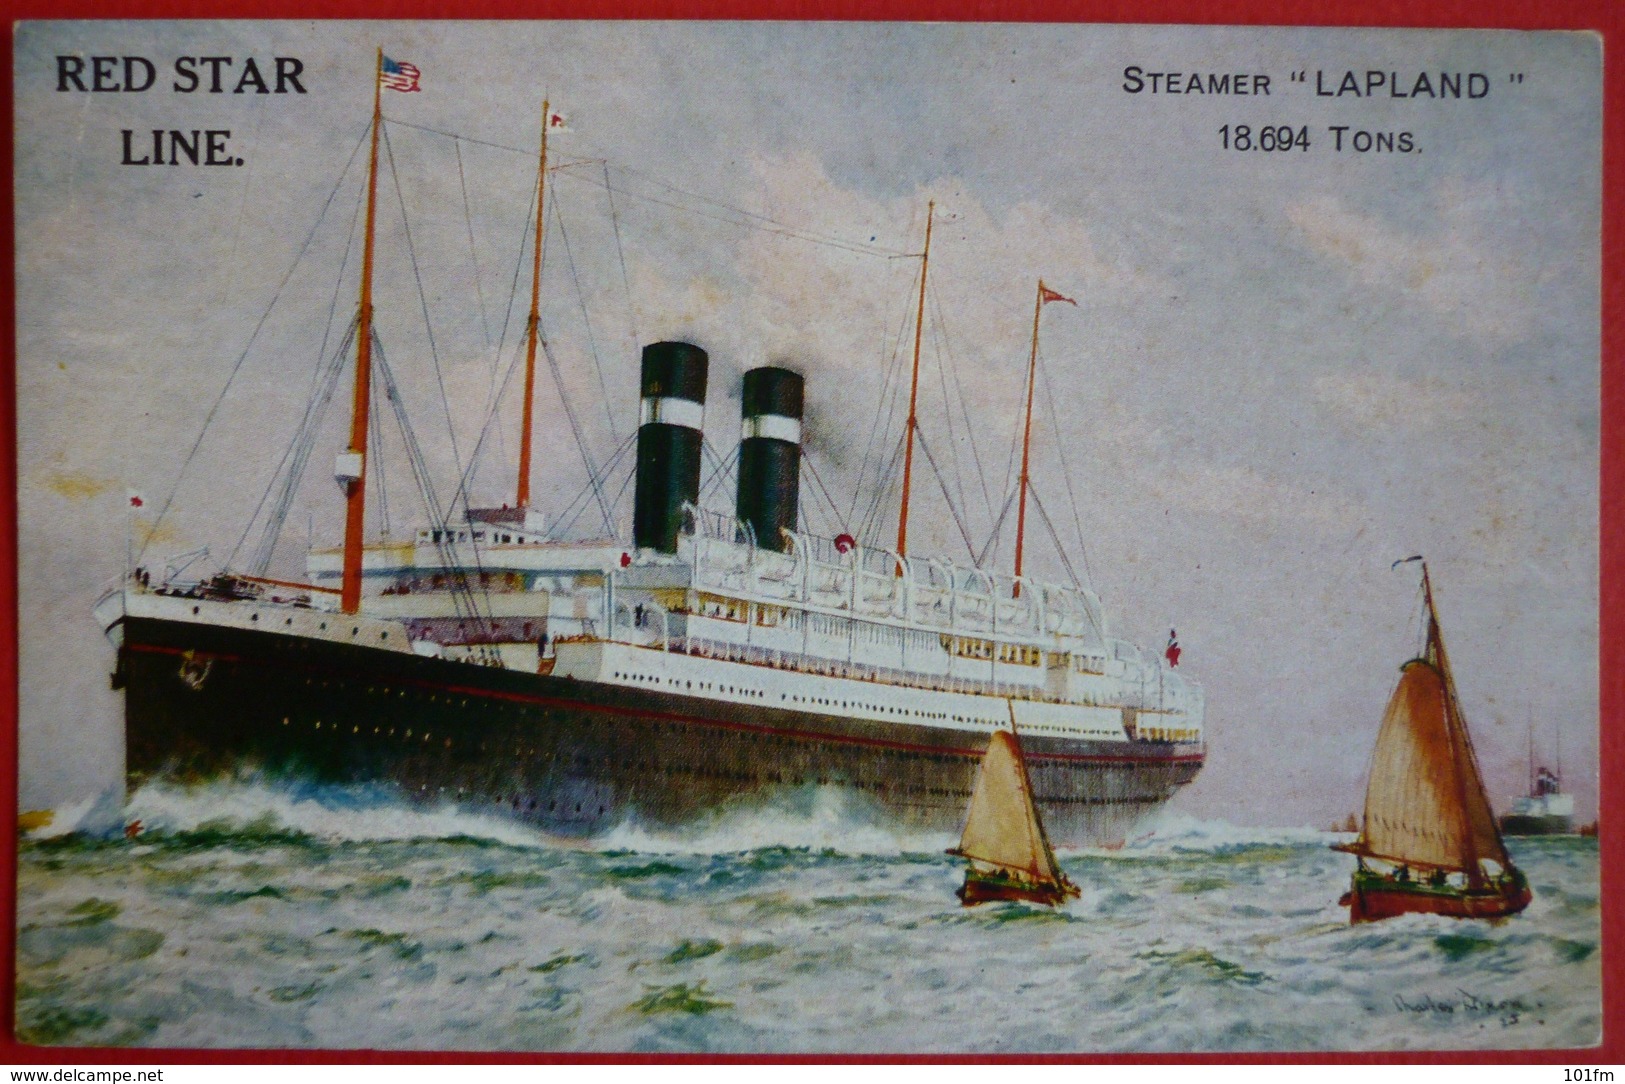 S.S. LAPLAND - RED STAR LINE - Steamers